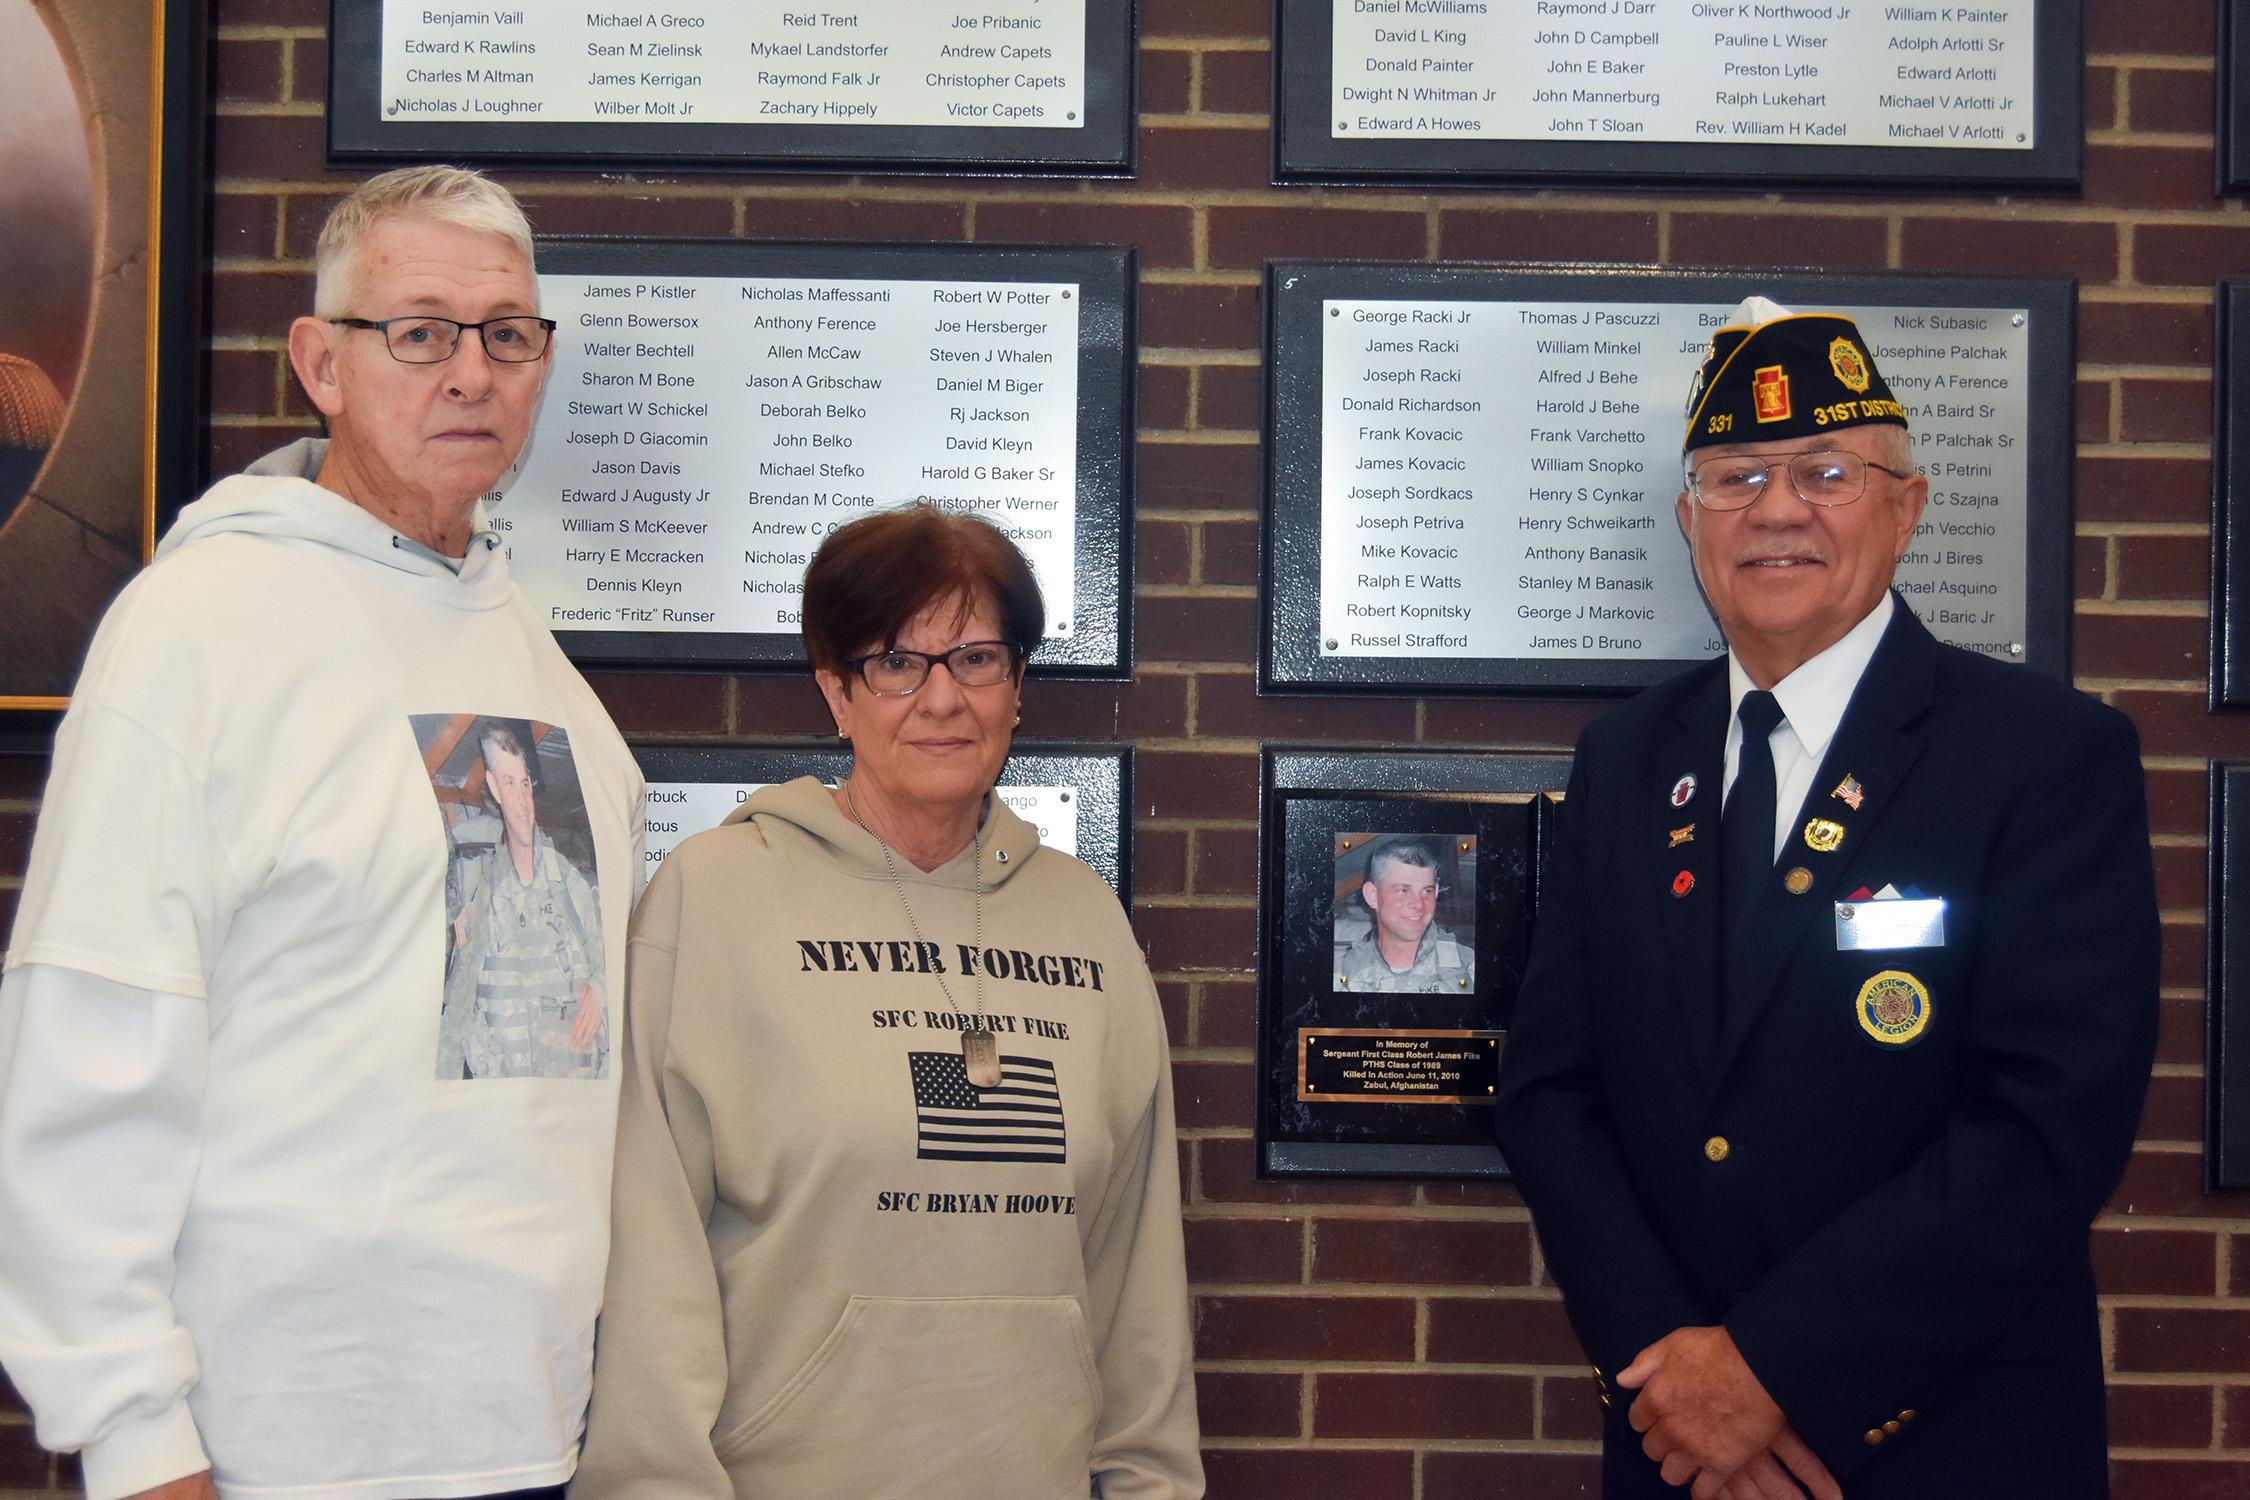 Jim and Chris Fike, Parents of SFC Robert J. Fike Jim Drnjevich, and Commander of the Trafford American Legion